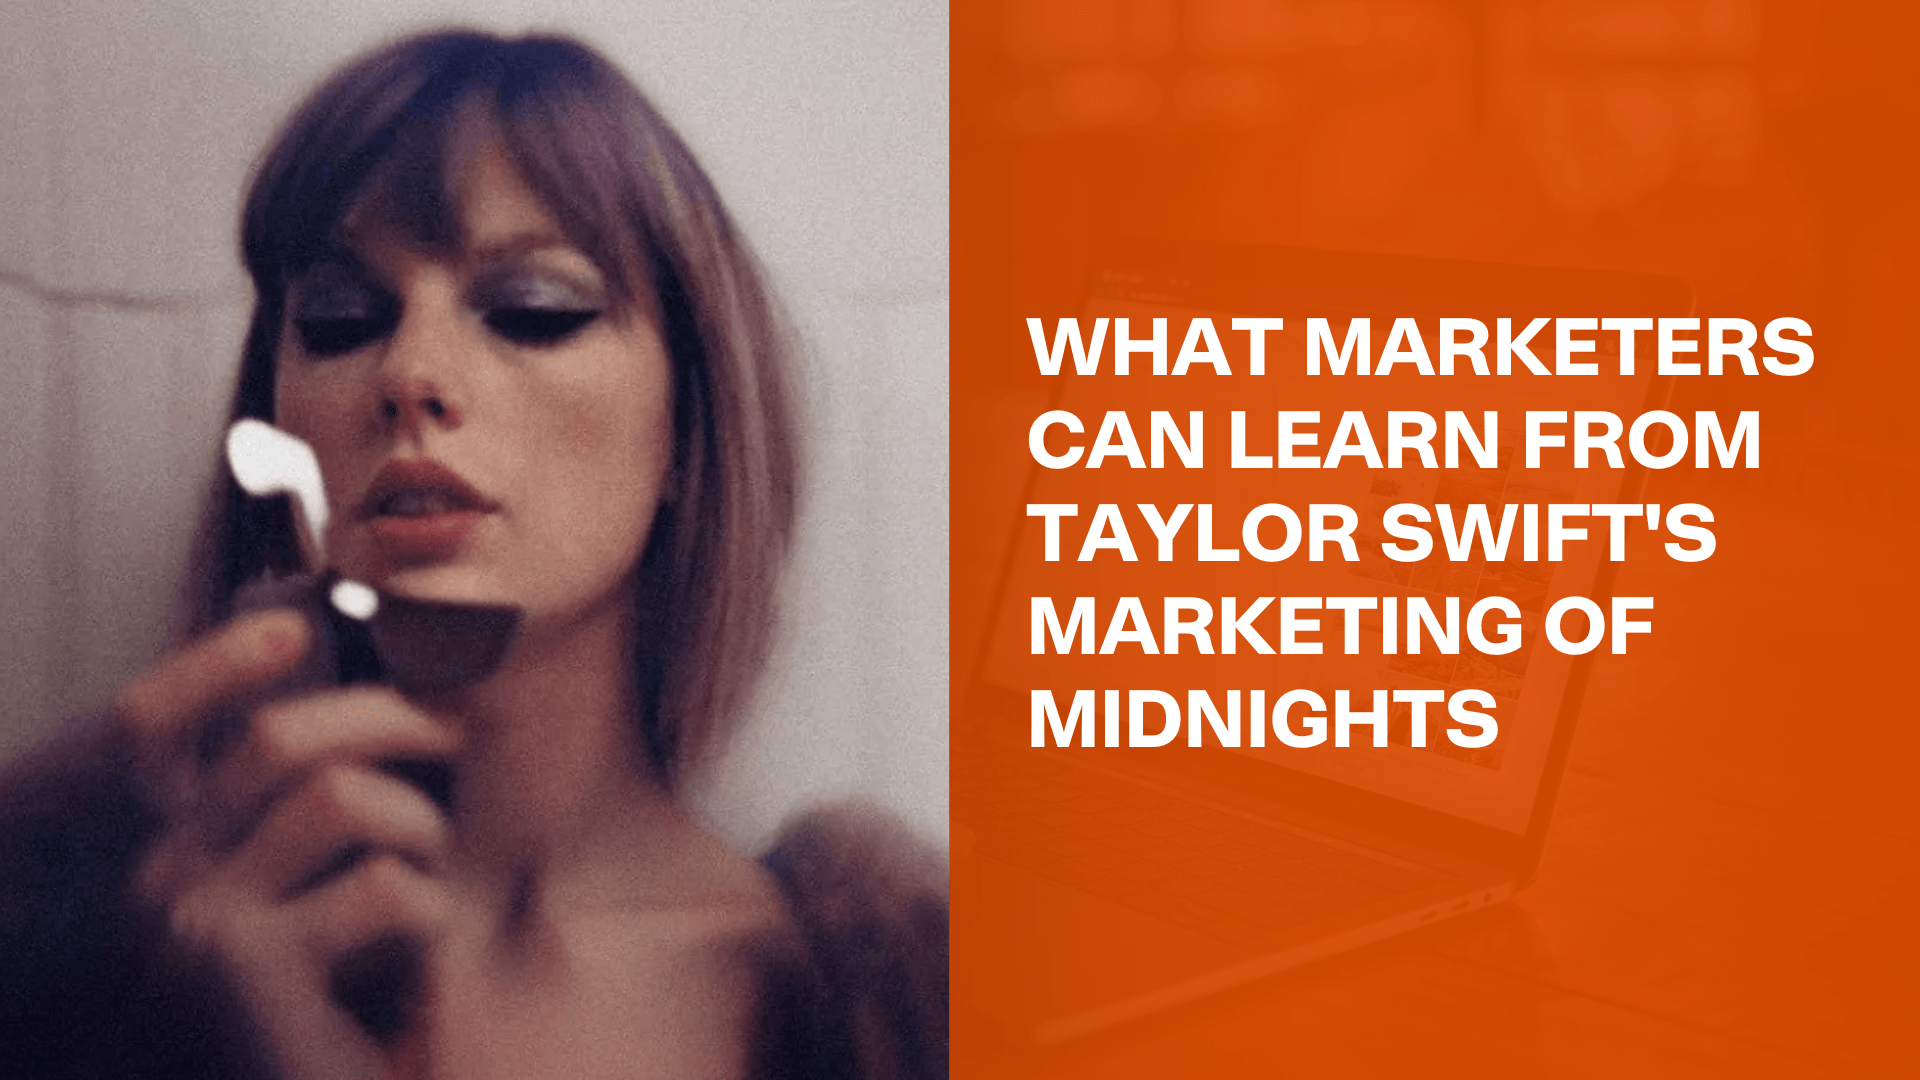 What Marketers Can Learn From Taylor Swift's Marketing of Midnights